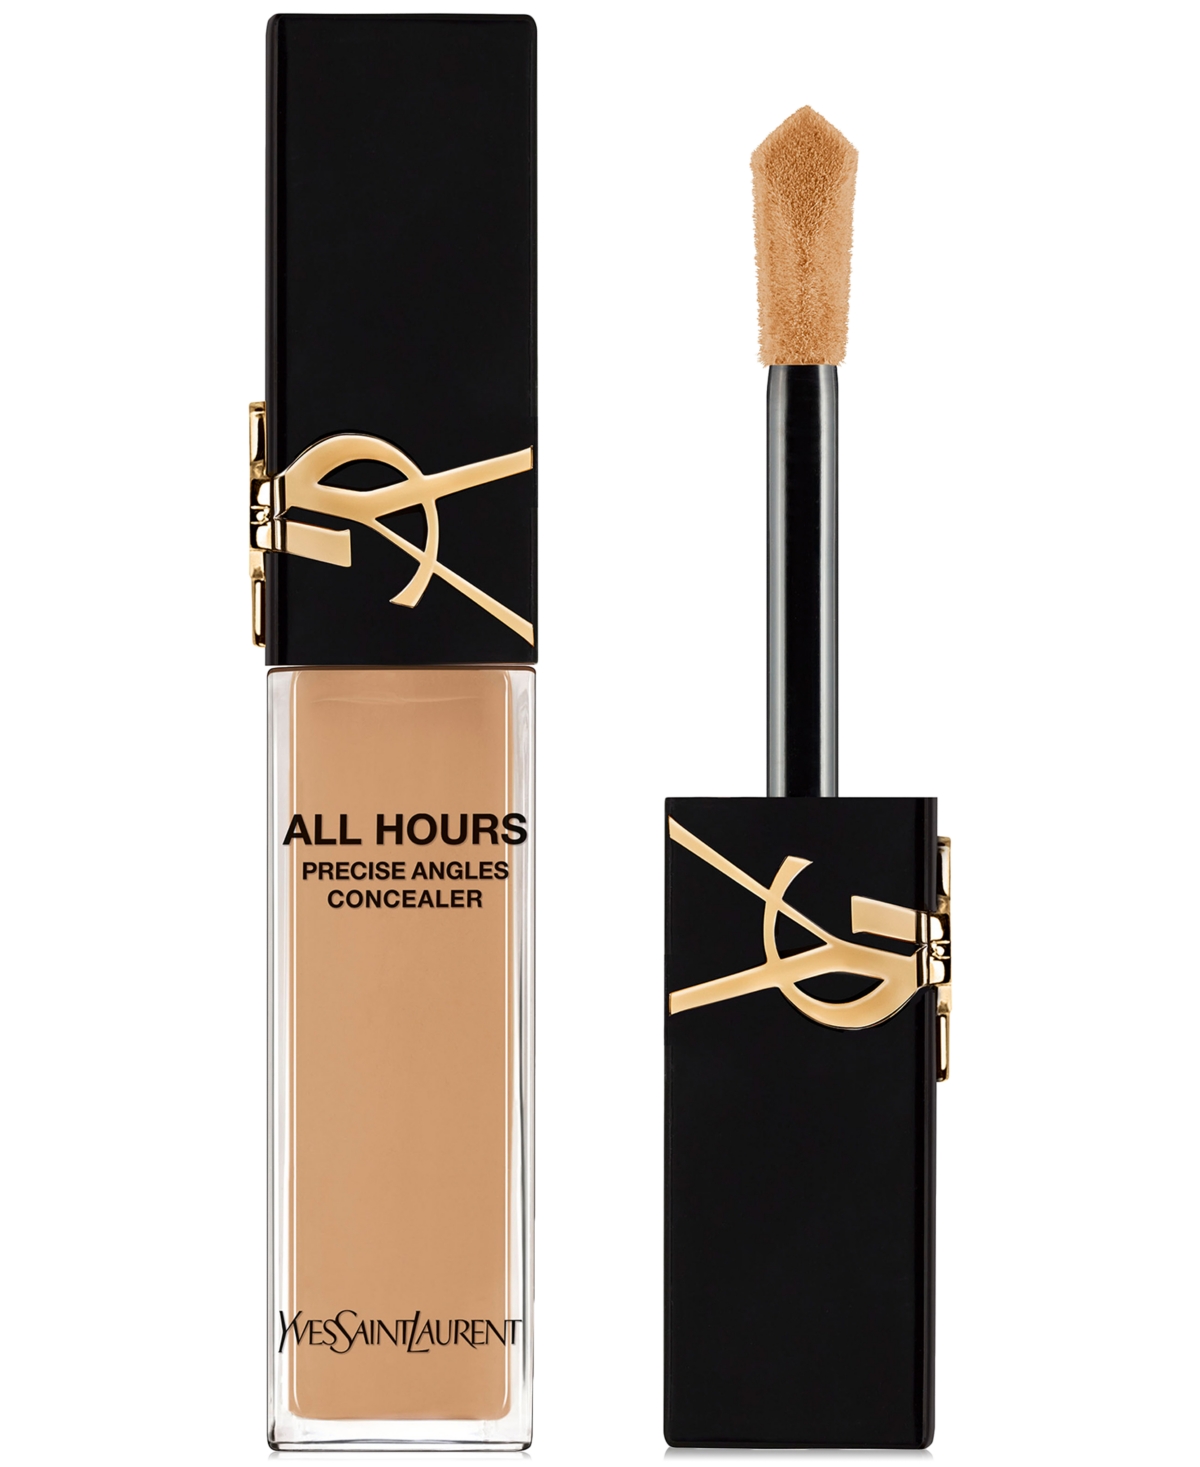 Saint Laurent All Hours Precise Angles Full-coverage Concealer In Medium Shade With Cool Undertones